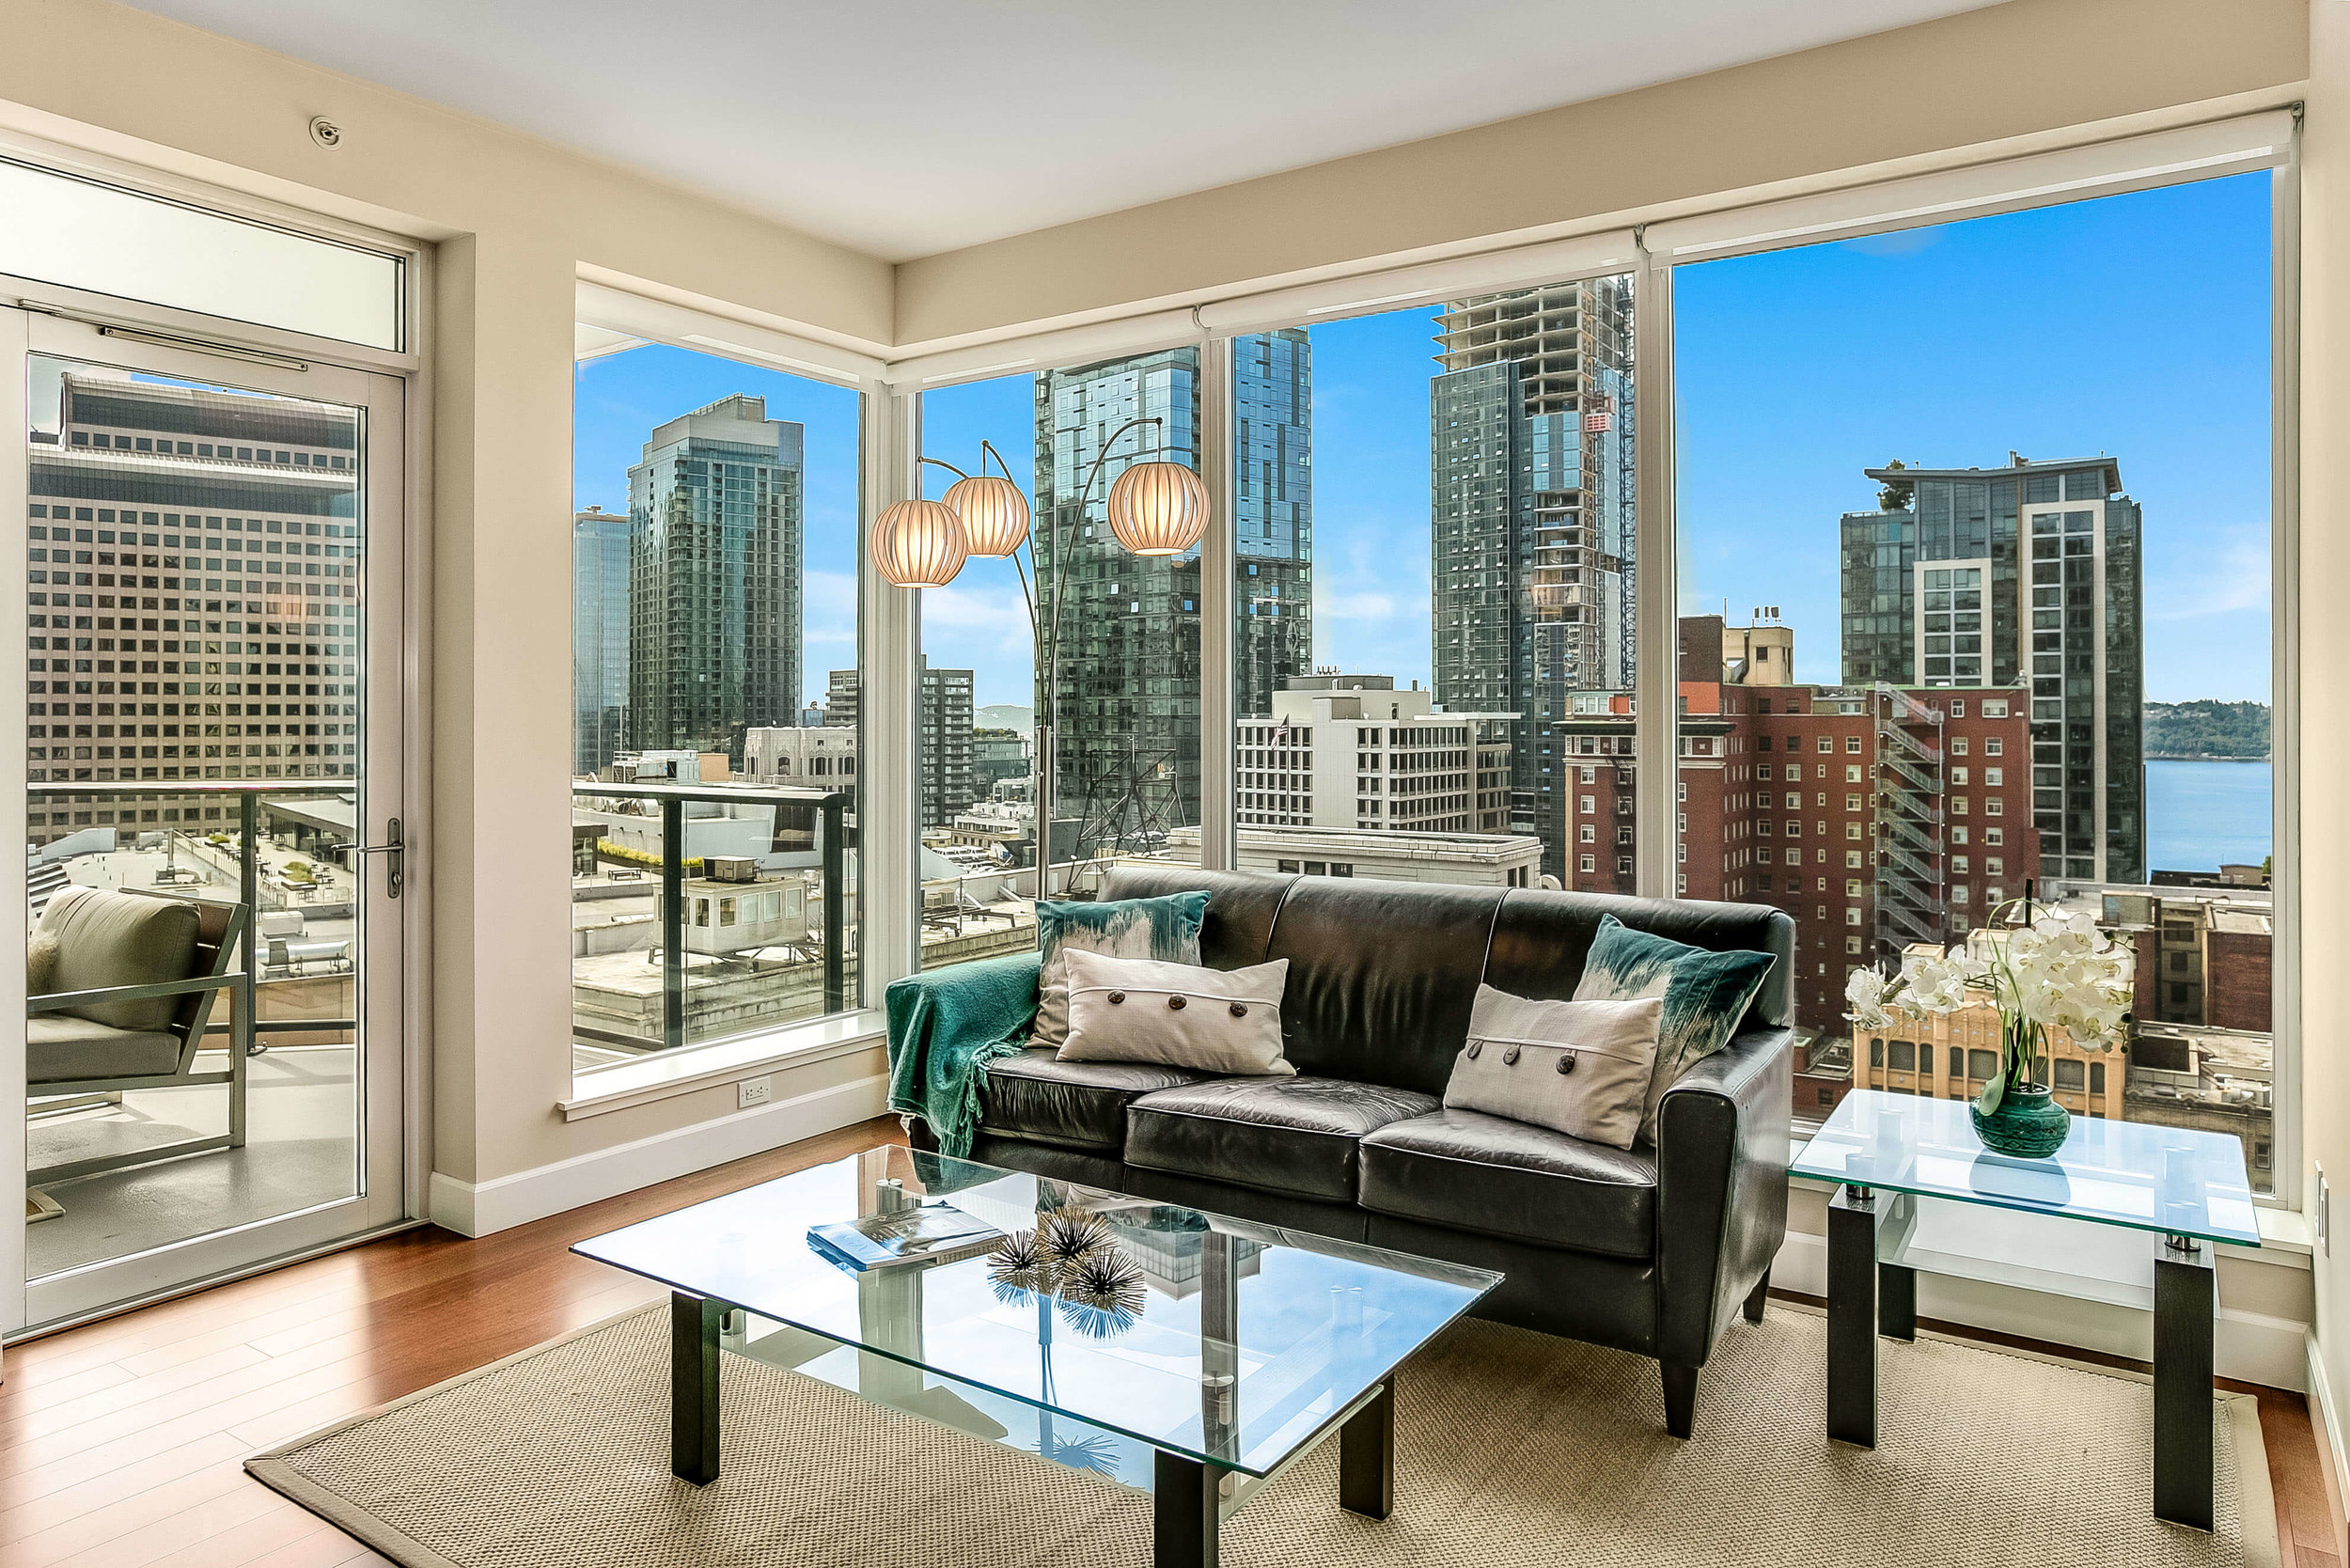 Escala-Condo-For-Sale-Living-Area-Downtown-Seattle-Puget-Sound-Views.jpg